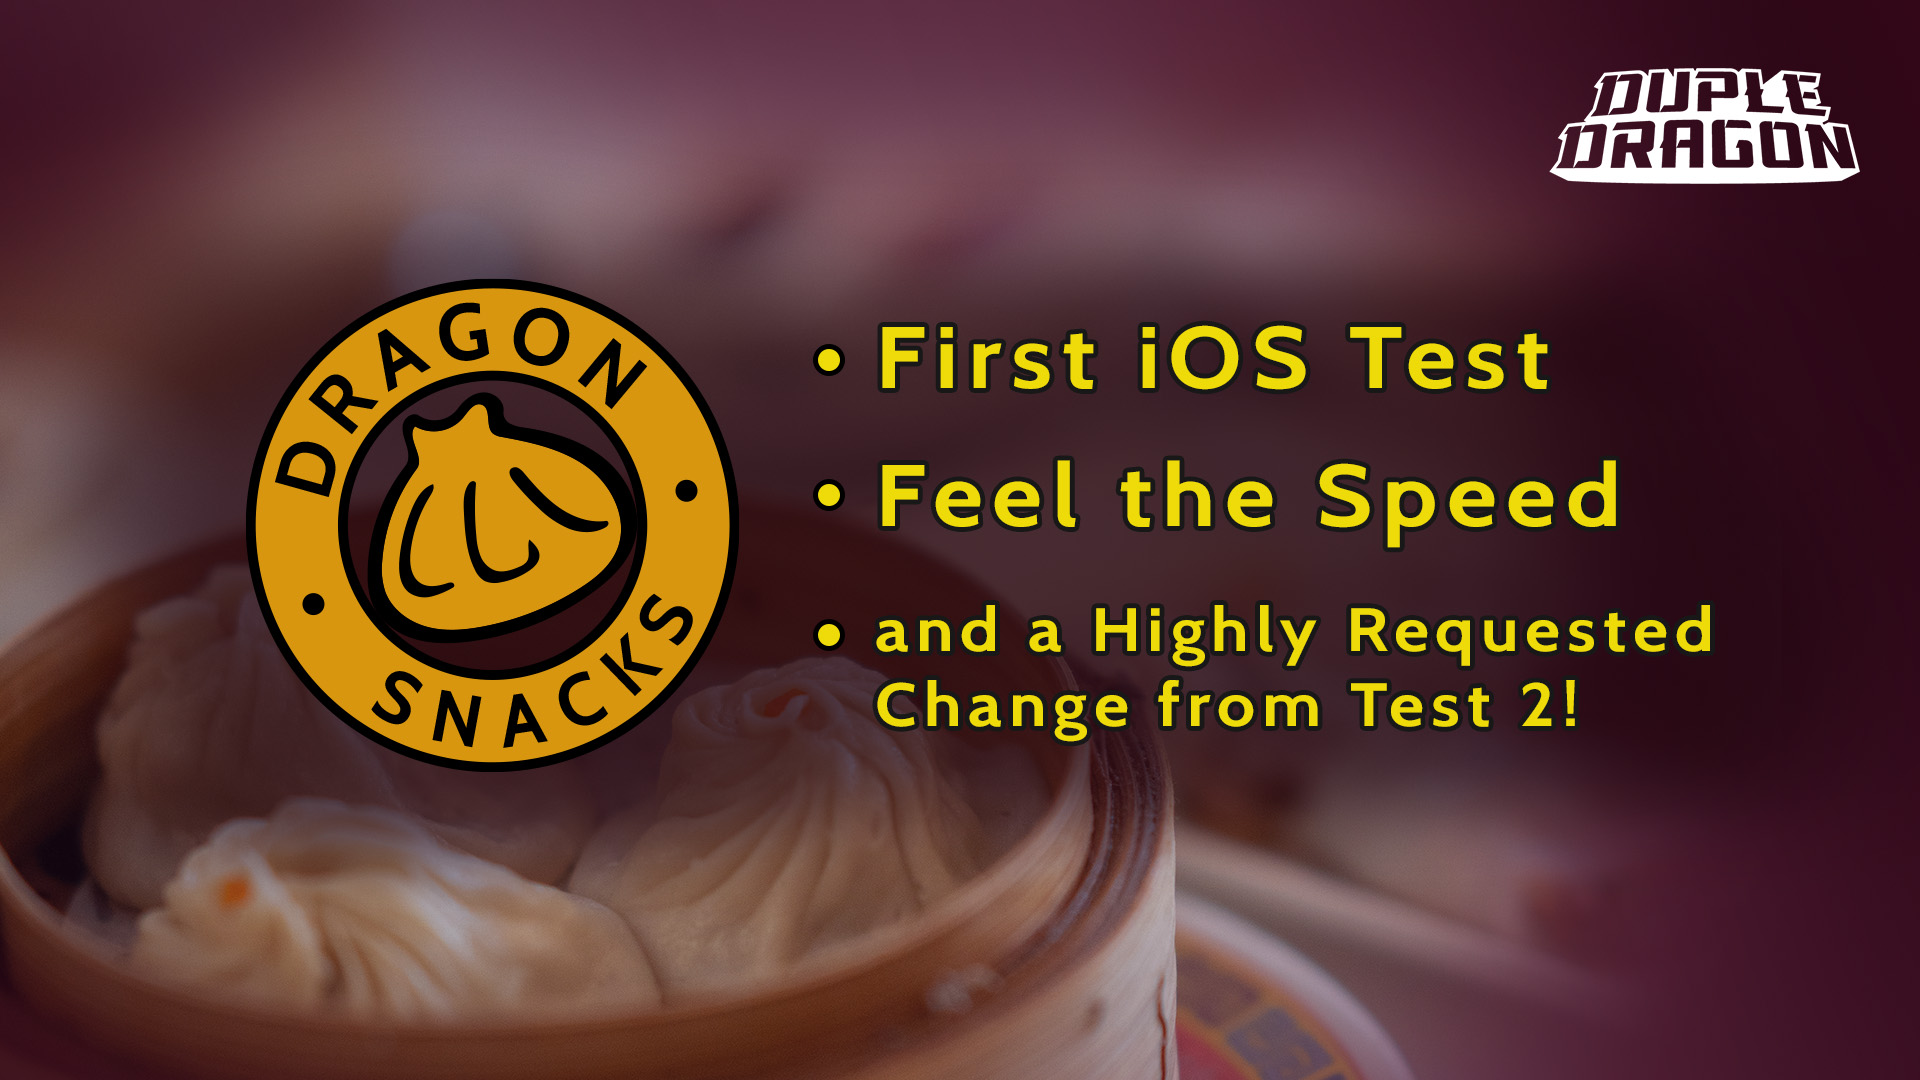 Dragon Snacks: iOS Test, Feel the Speed, and a Highly Requested Change